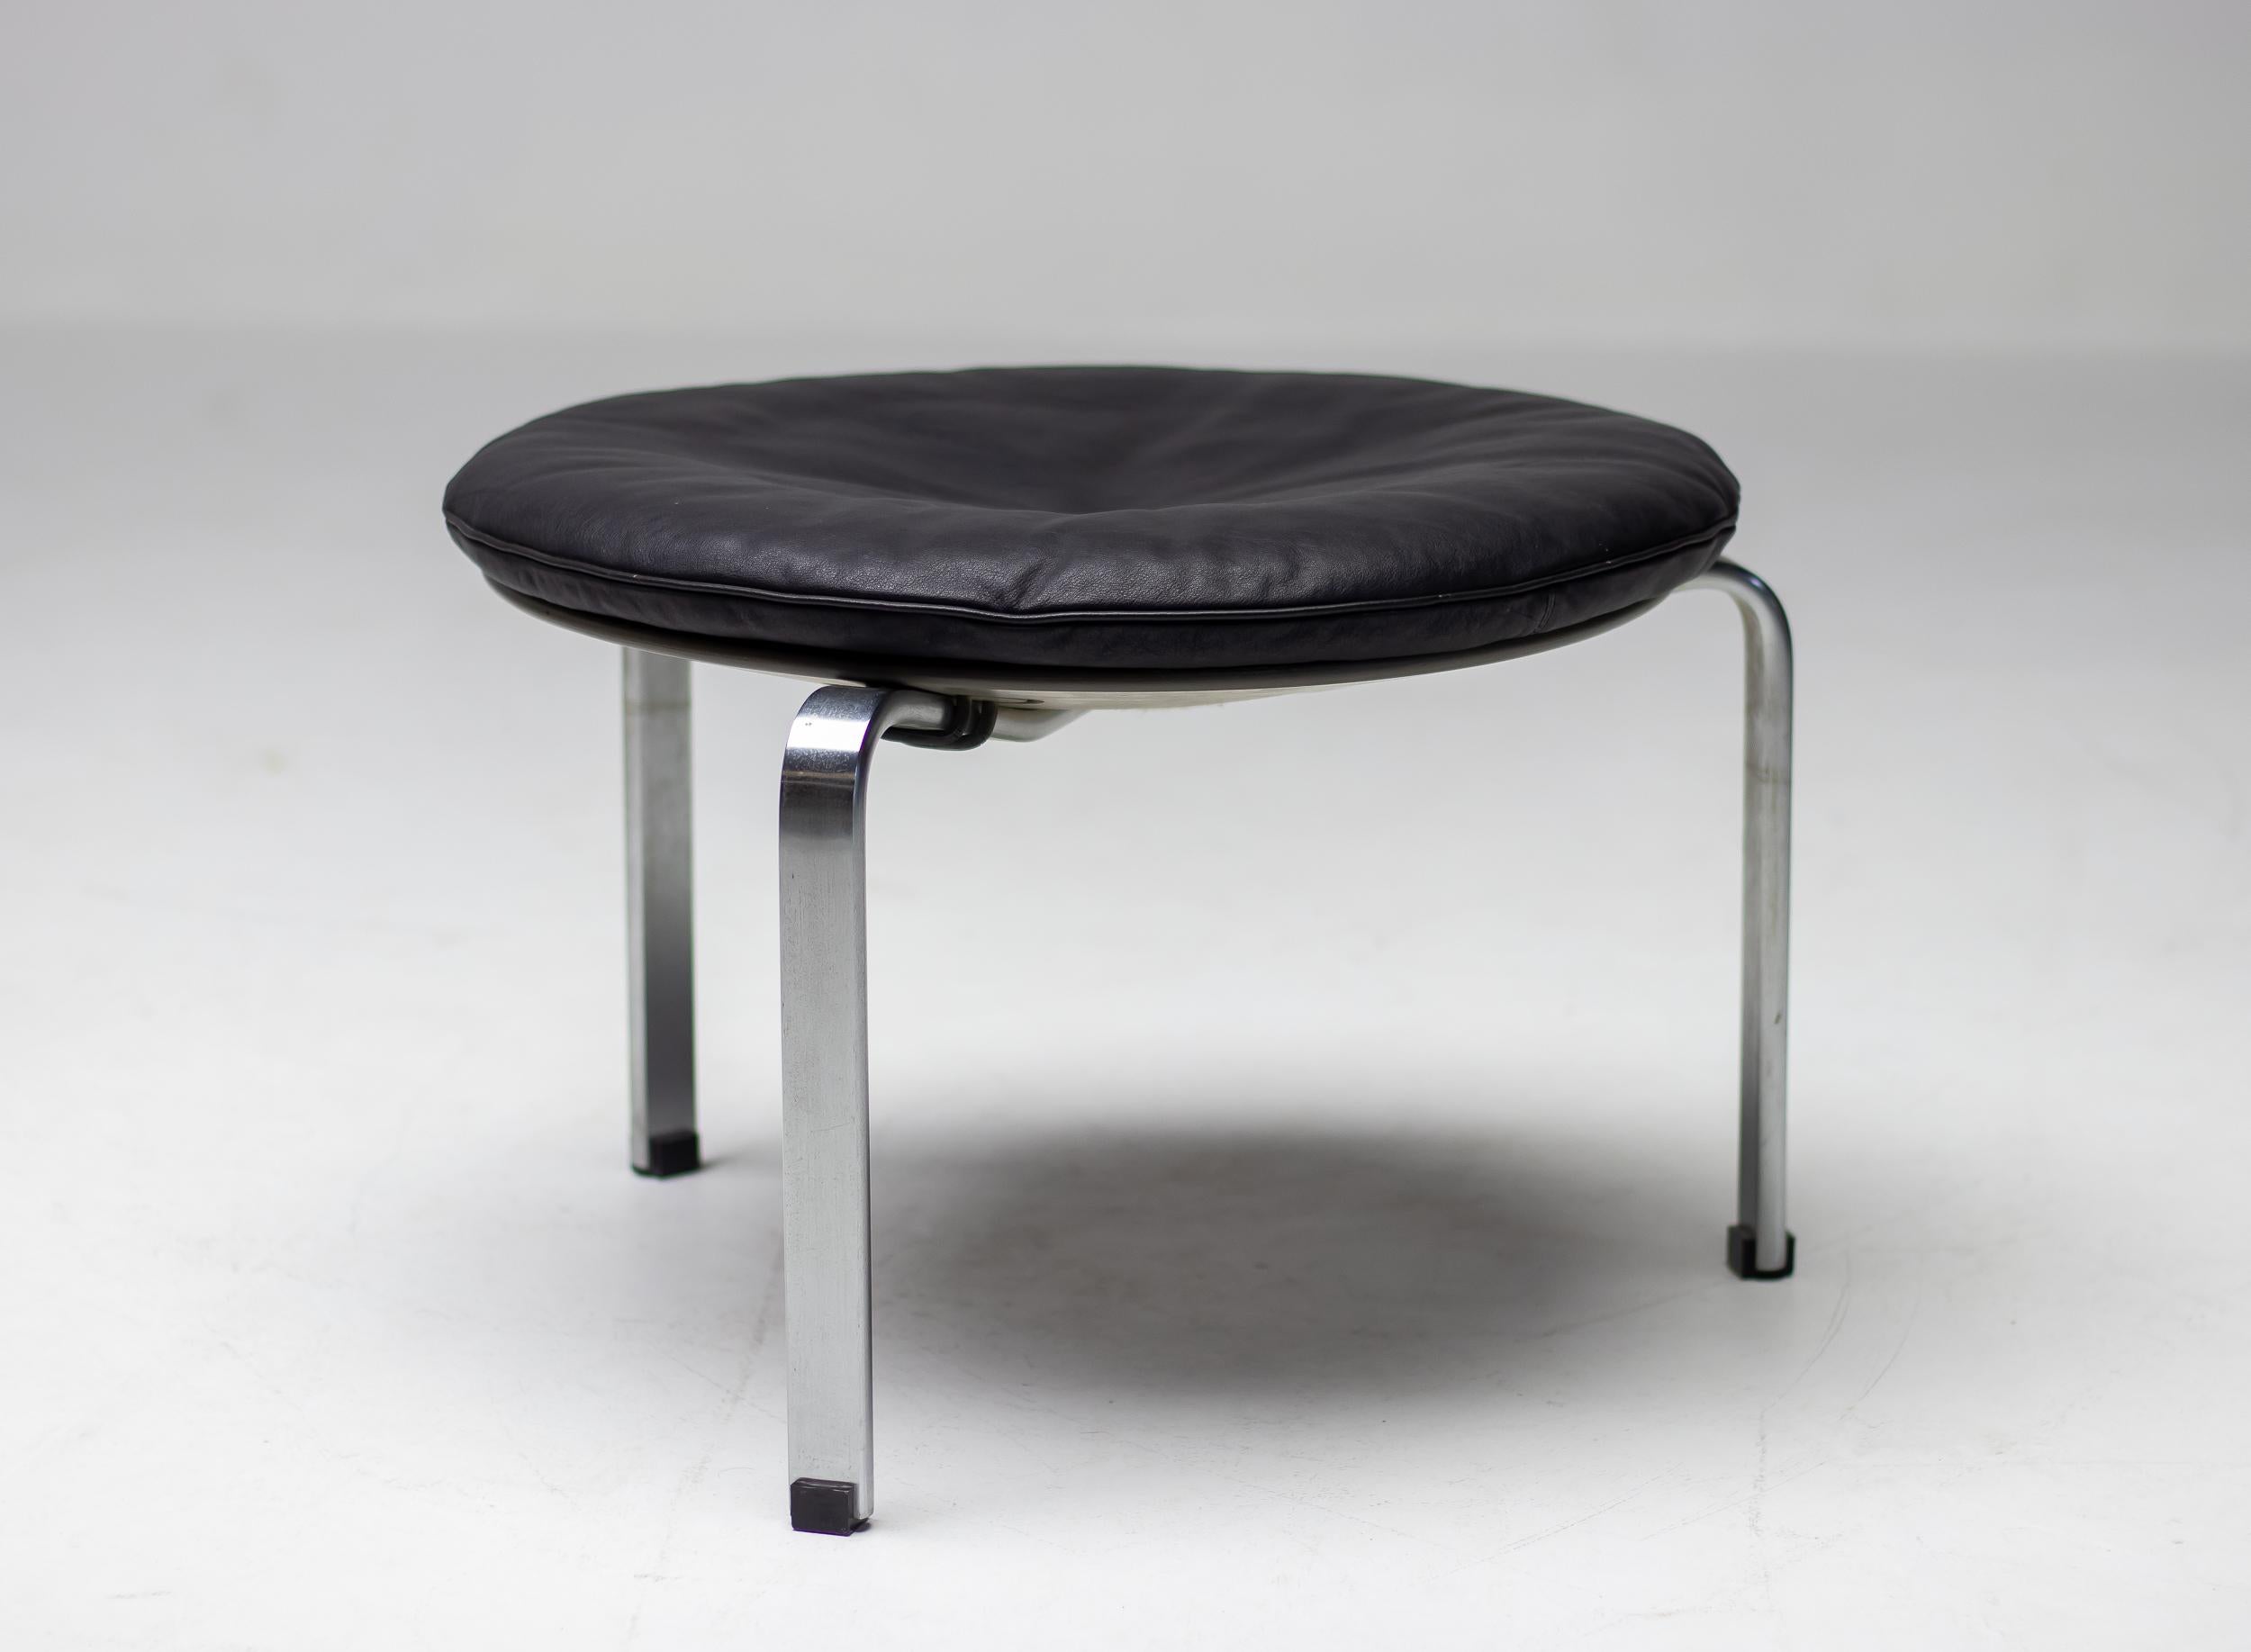 Rare all original early production Poul Kjaerholm E. Kold Christensen set of 3 PK33 stools.
Black leather seat pad and matte-chromed steel base with grey lacquered circular plywood seat support and rubber straps. The pads have the original 1st